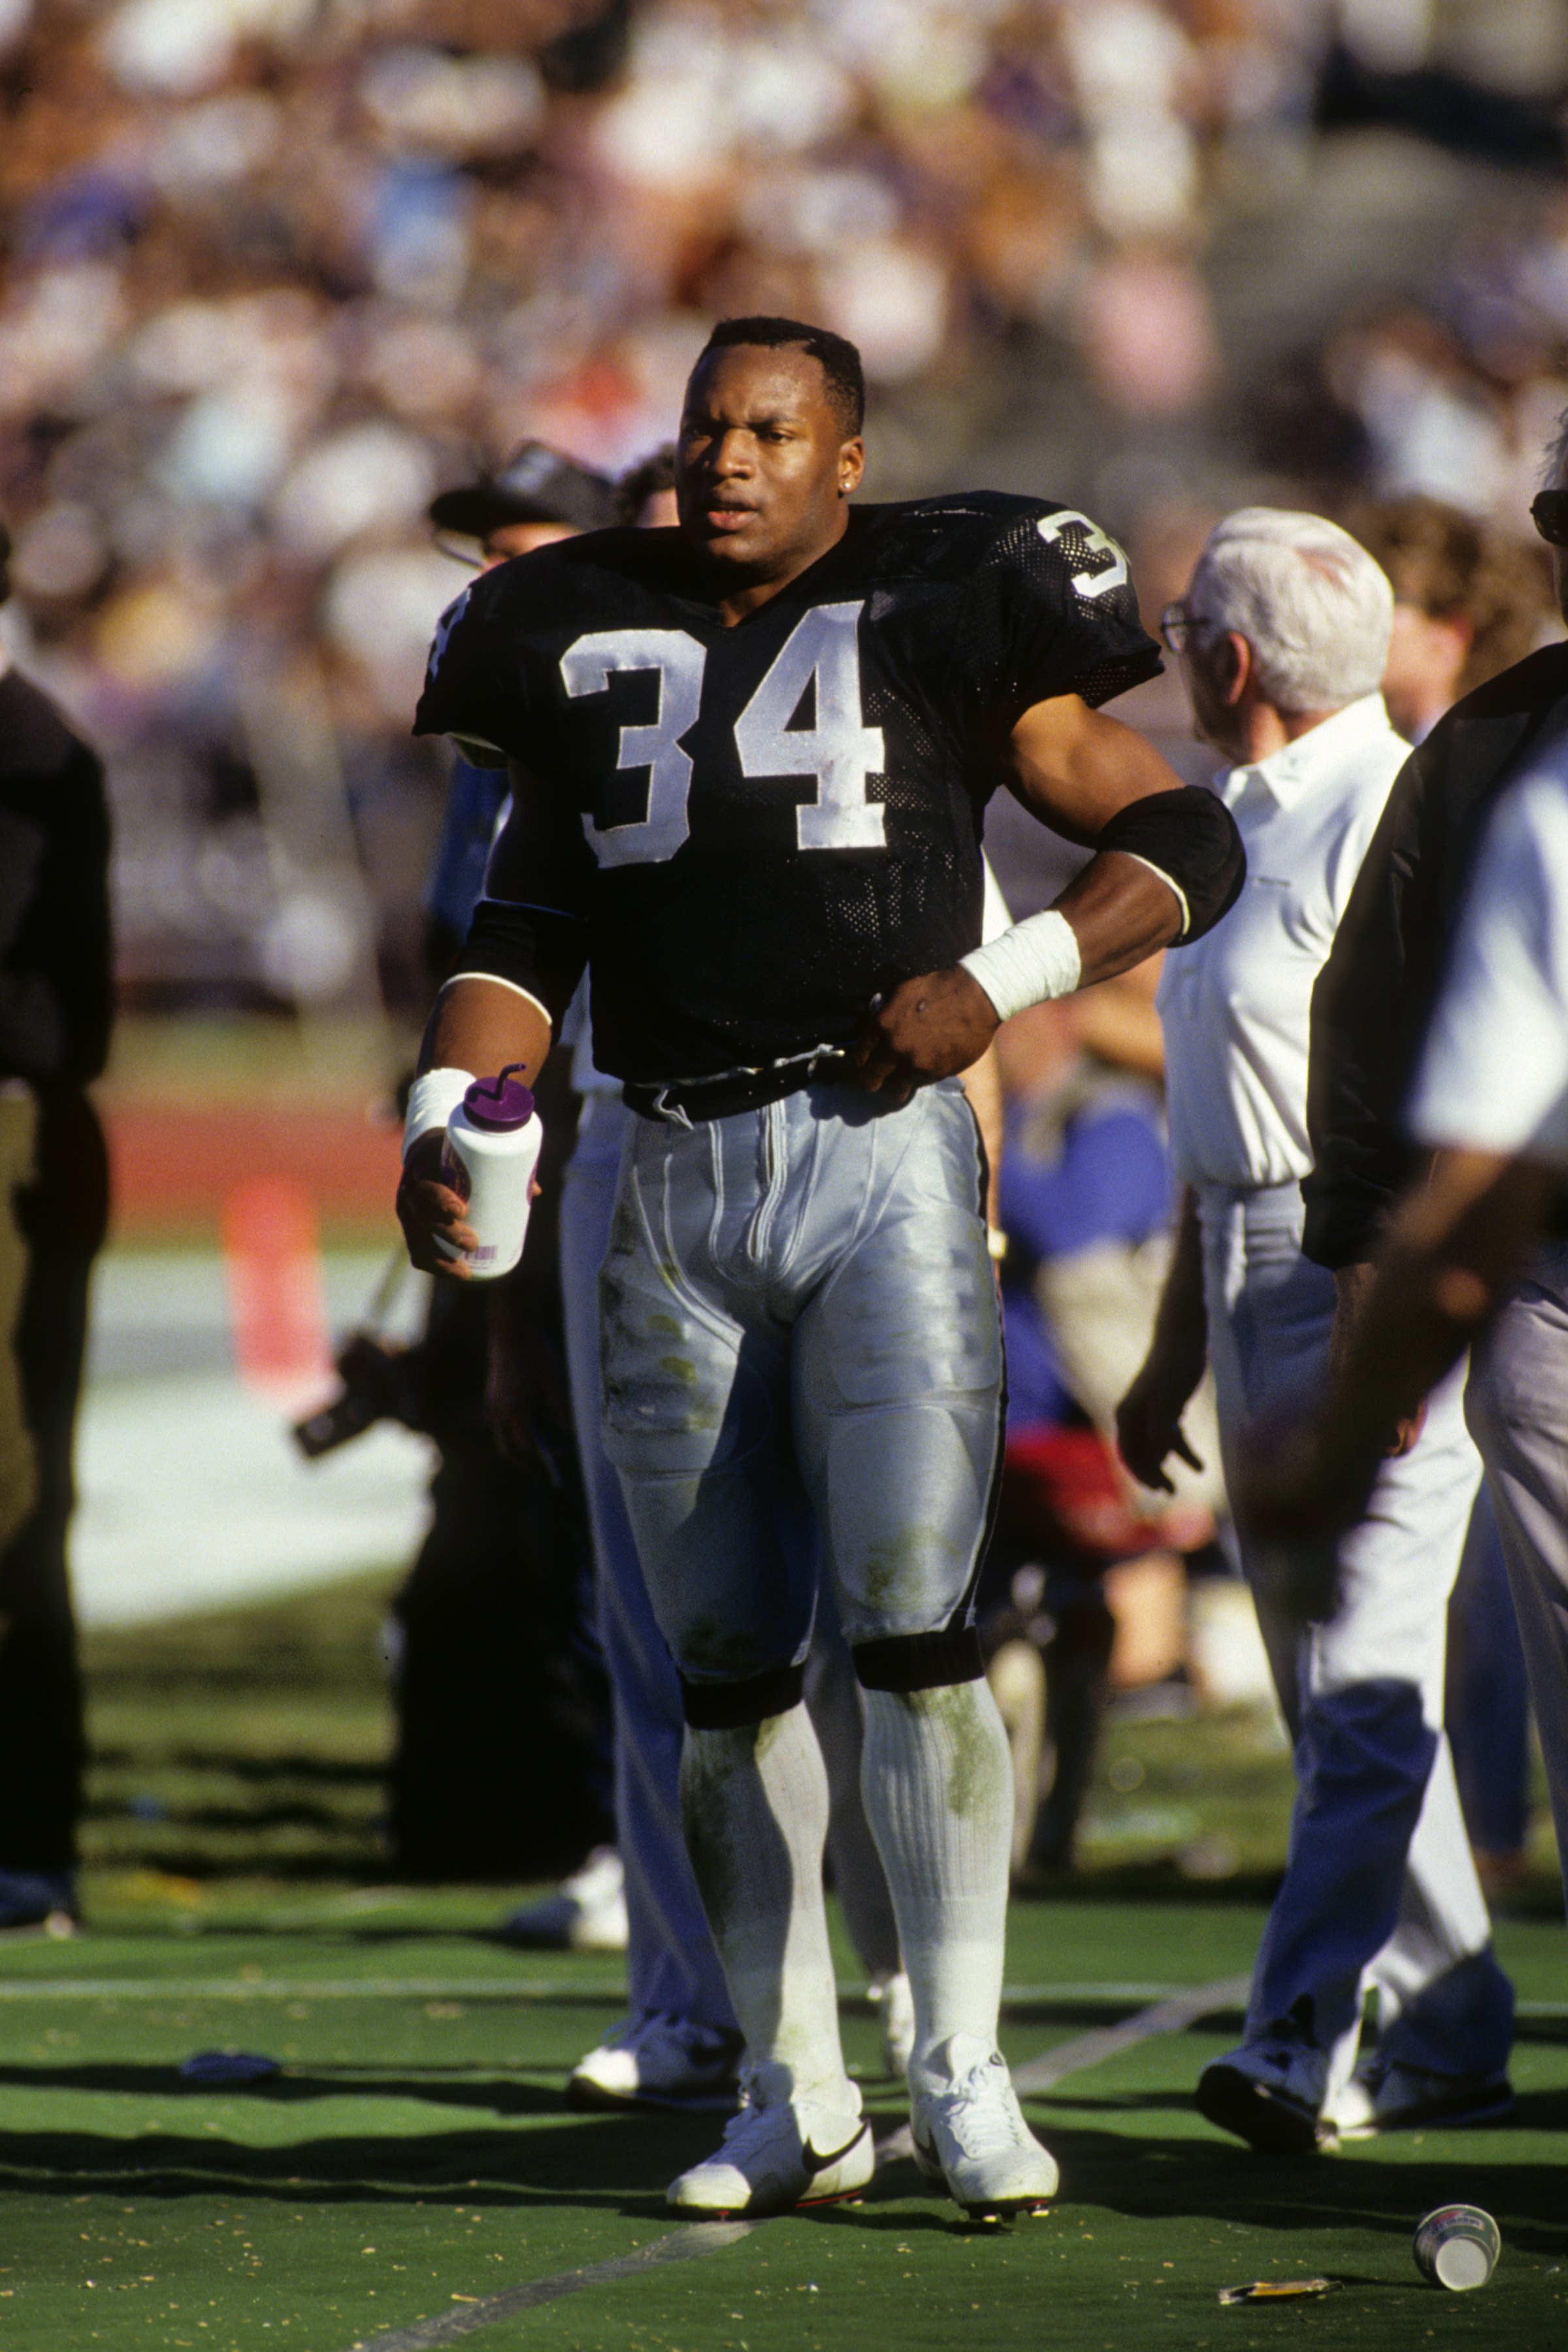 Raiders' Bo Jackson: One of the NFL's Most Explosive and